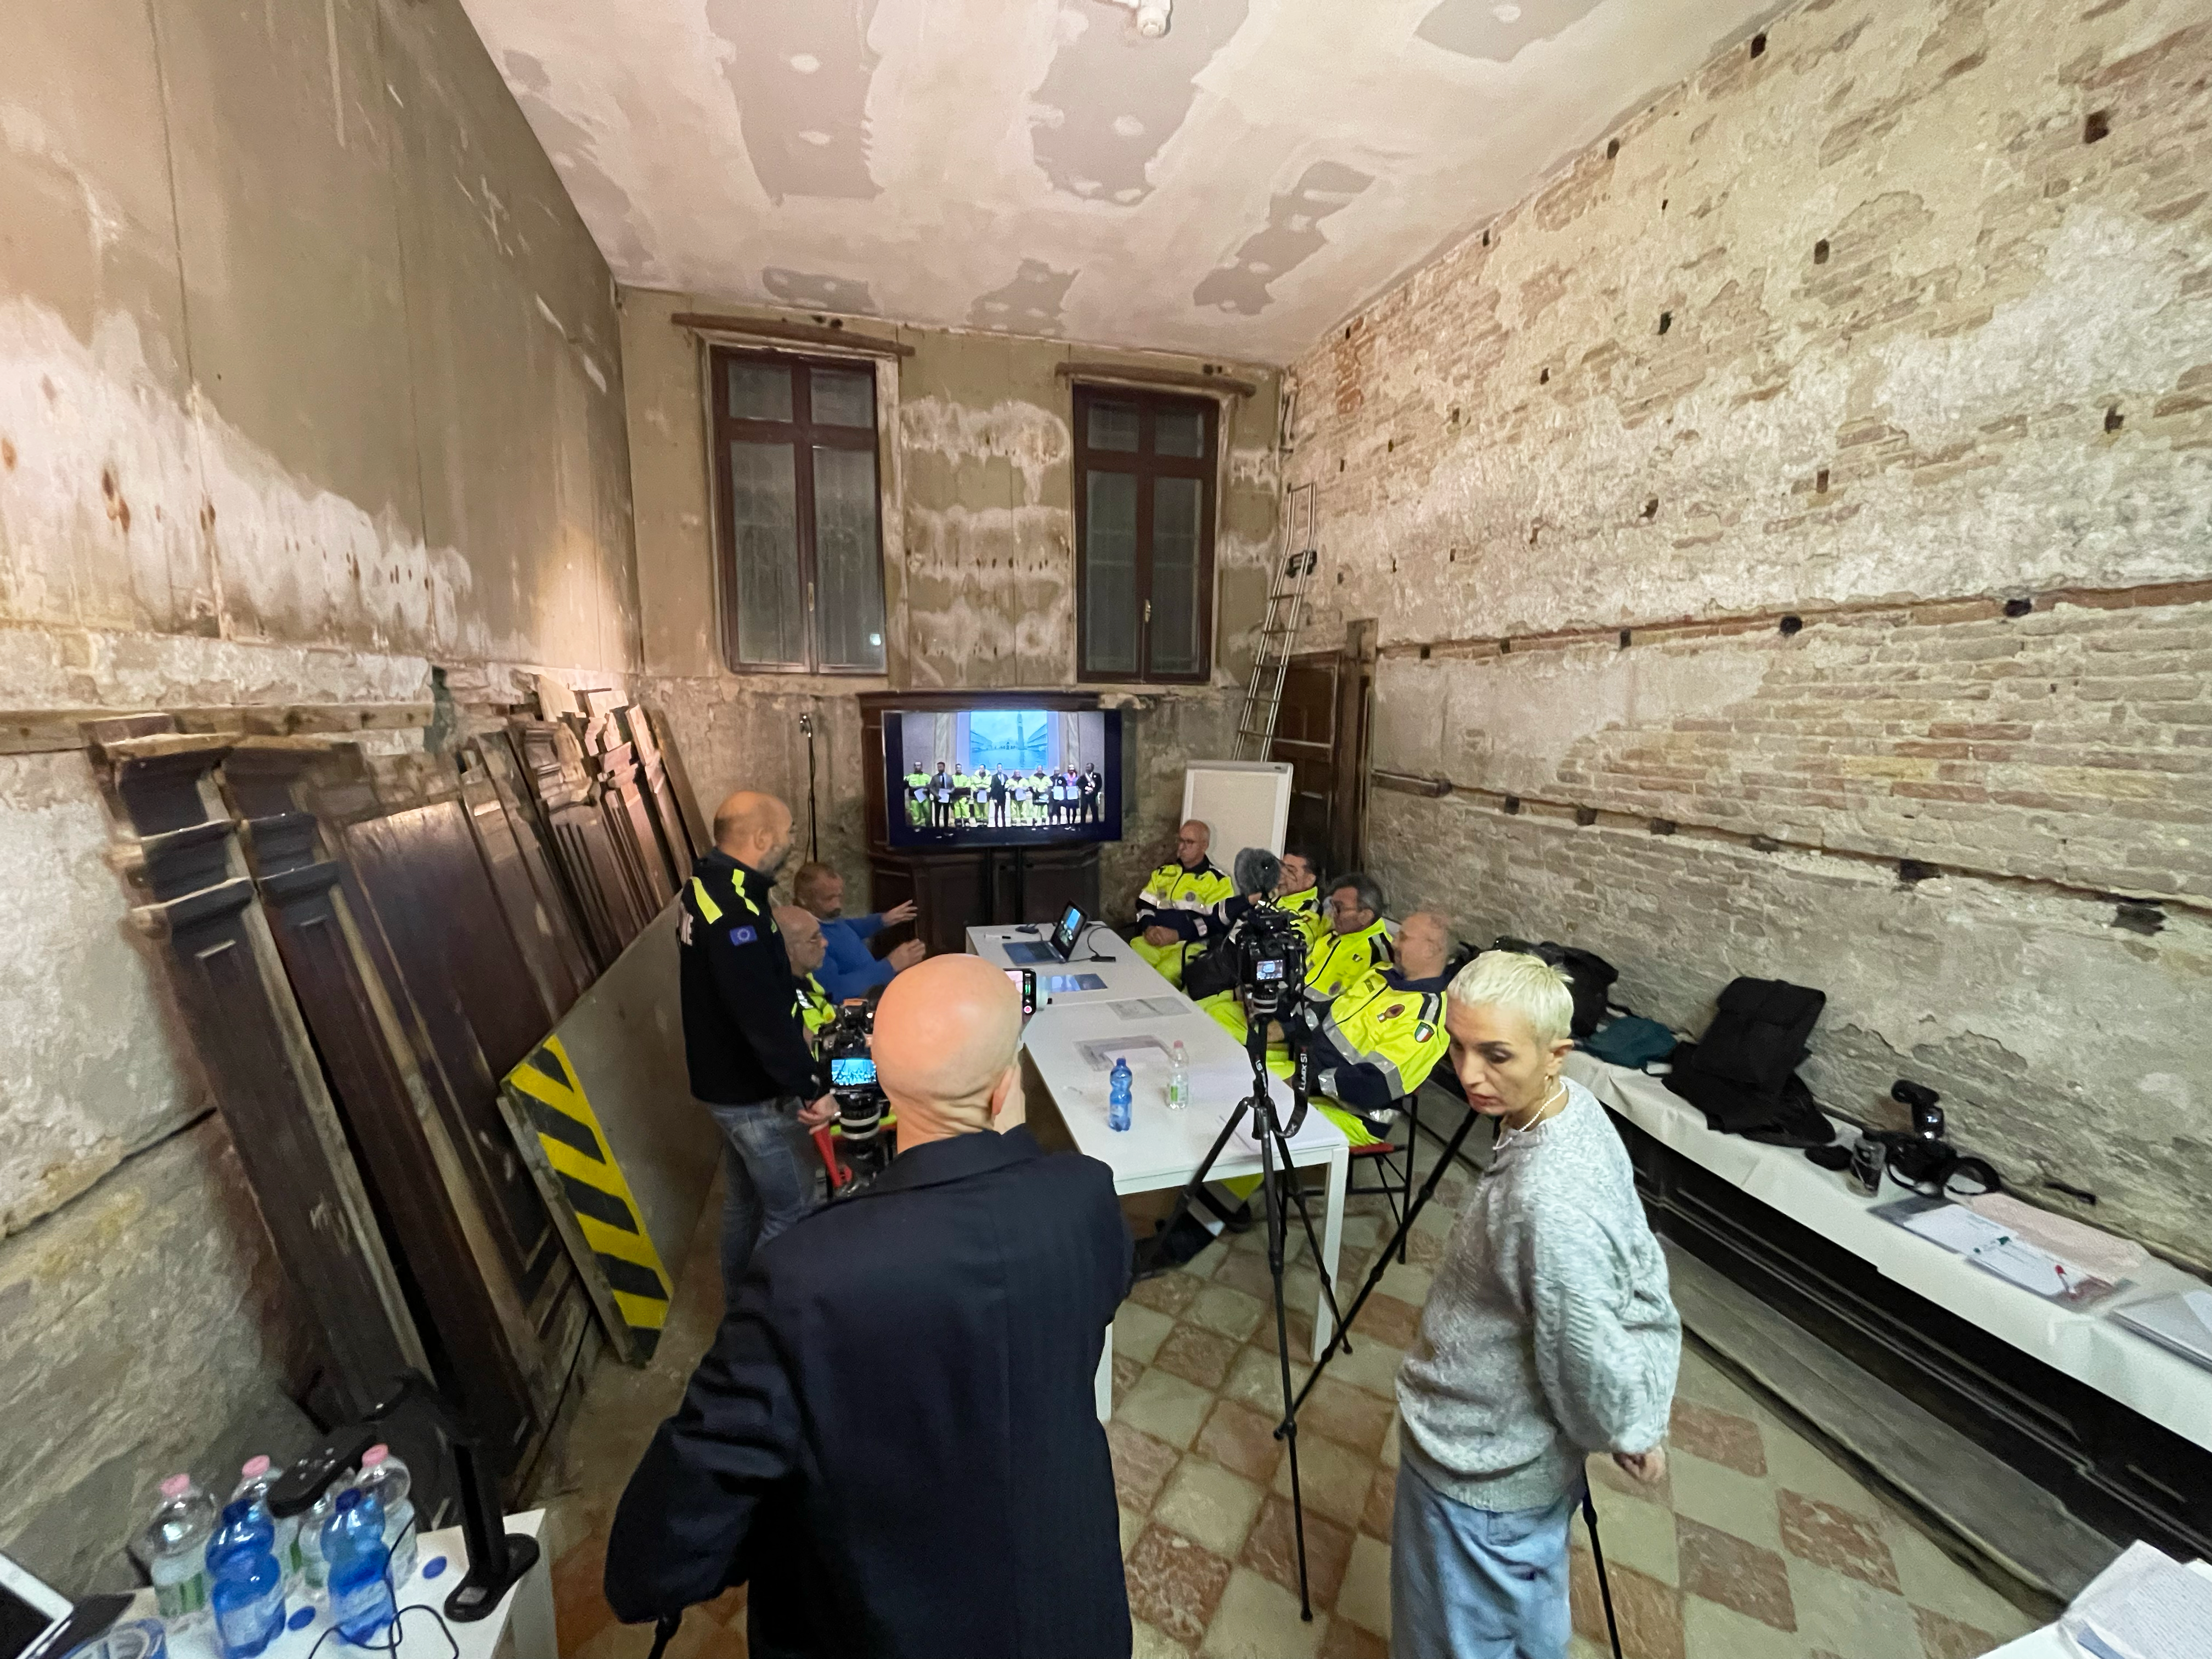 Laboratory with Giulia Bruno e Armin Linke | Artistic project: cultural reading of operational and archival images from institutions related to the logistics of the city and the Aqua Granda event.